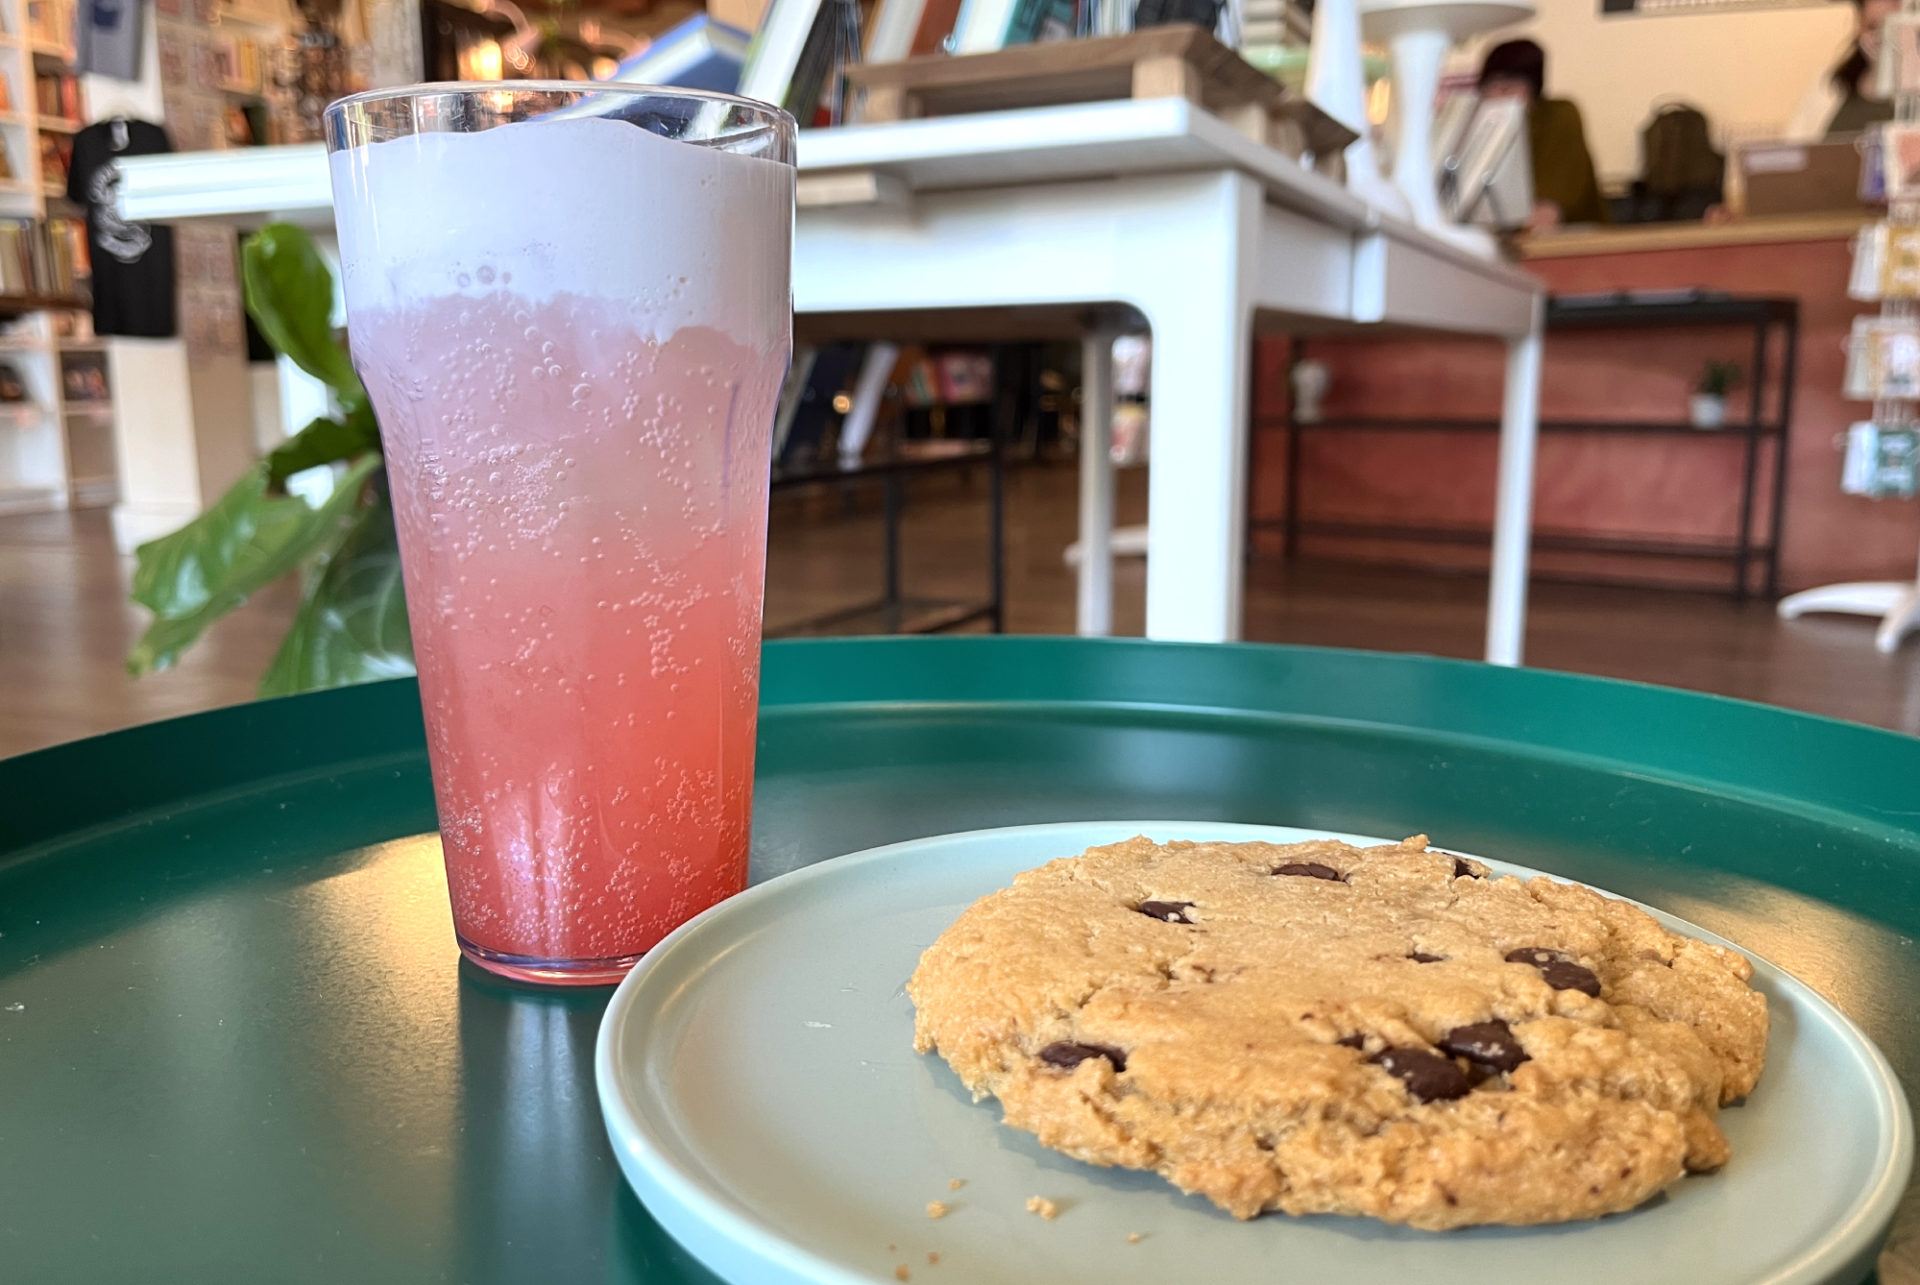 A tall glass of a pink beverage topped with cream and a light green plate with a chocolate chip cookie are both on a teal green side table at The Literary. Bookshelves are visible in the background.